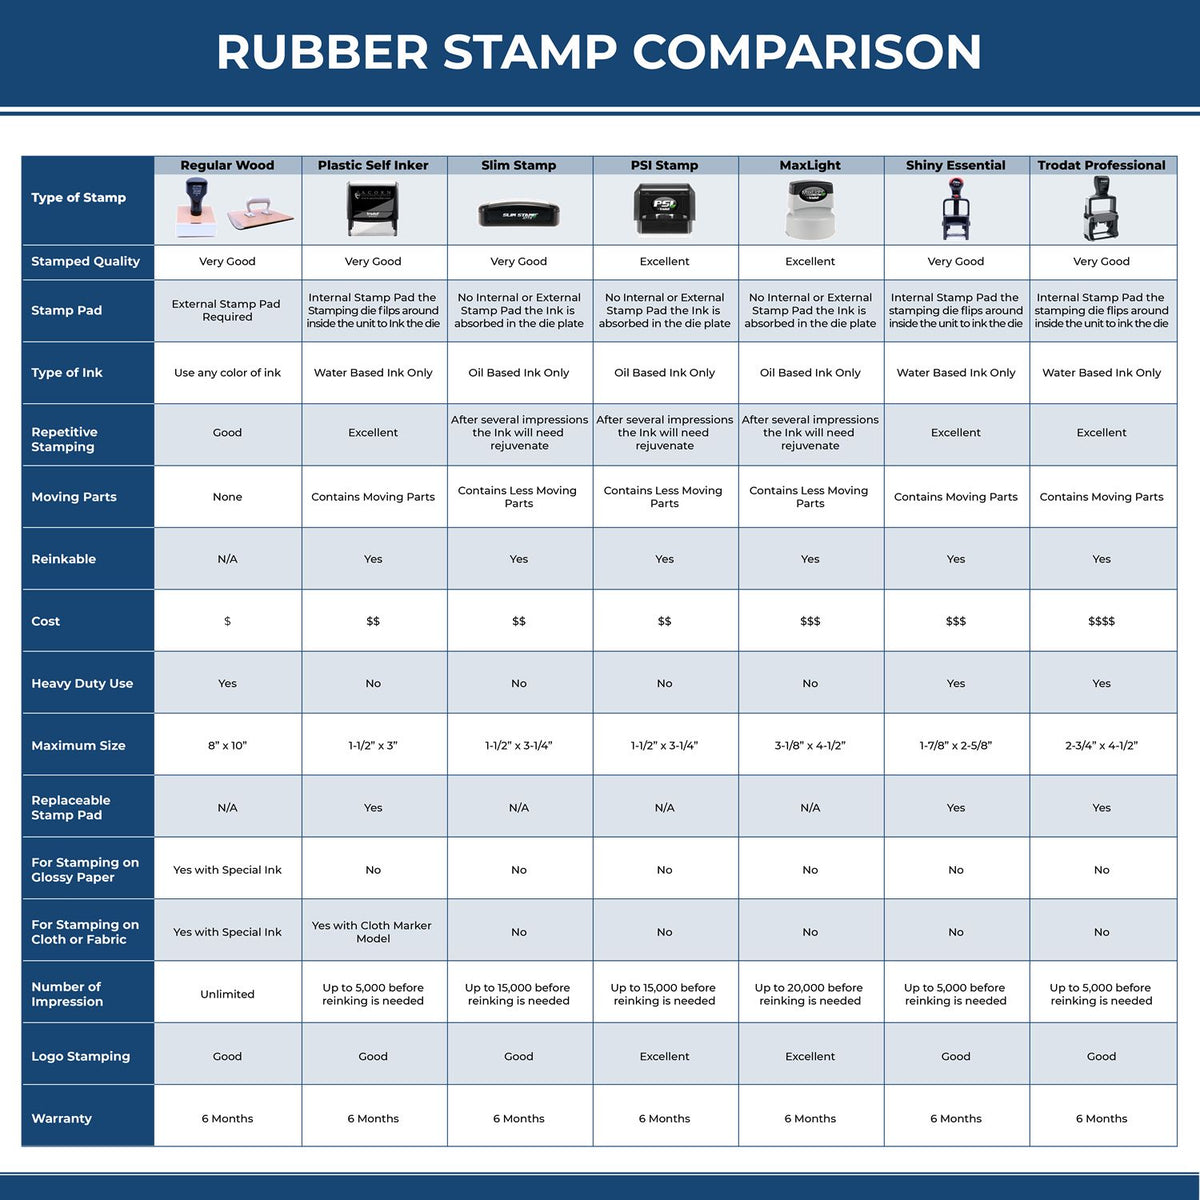 Large Wrong Bank Rubber Stamp 4592R Rubber Stamp Comparison